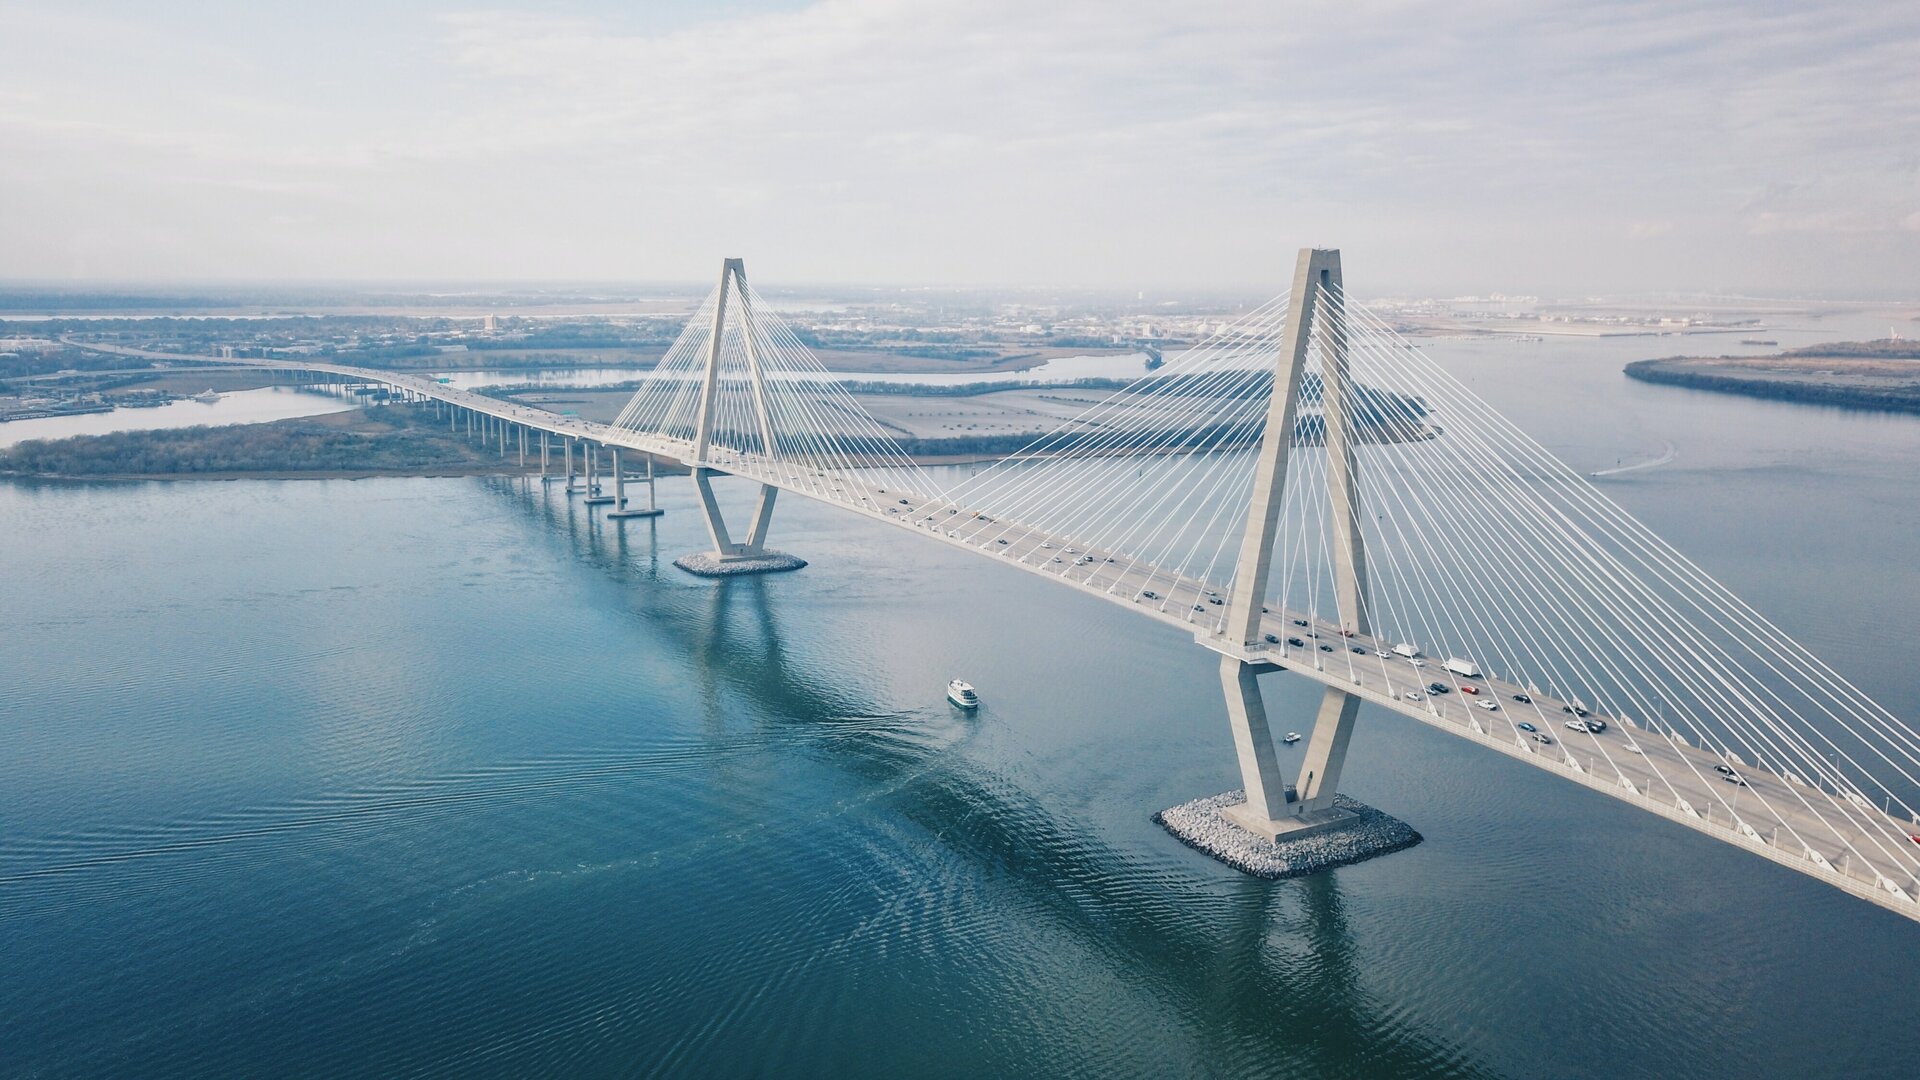 Modern long bridge over the sea with diamond-shaped bridge piers and cables.